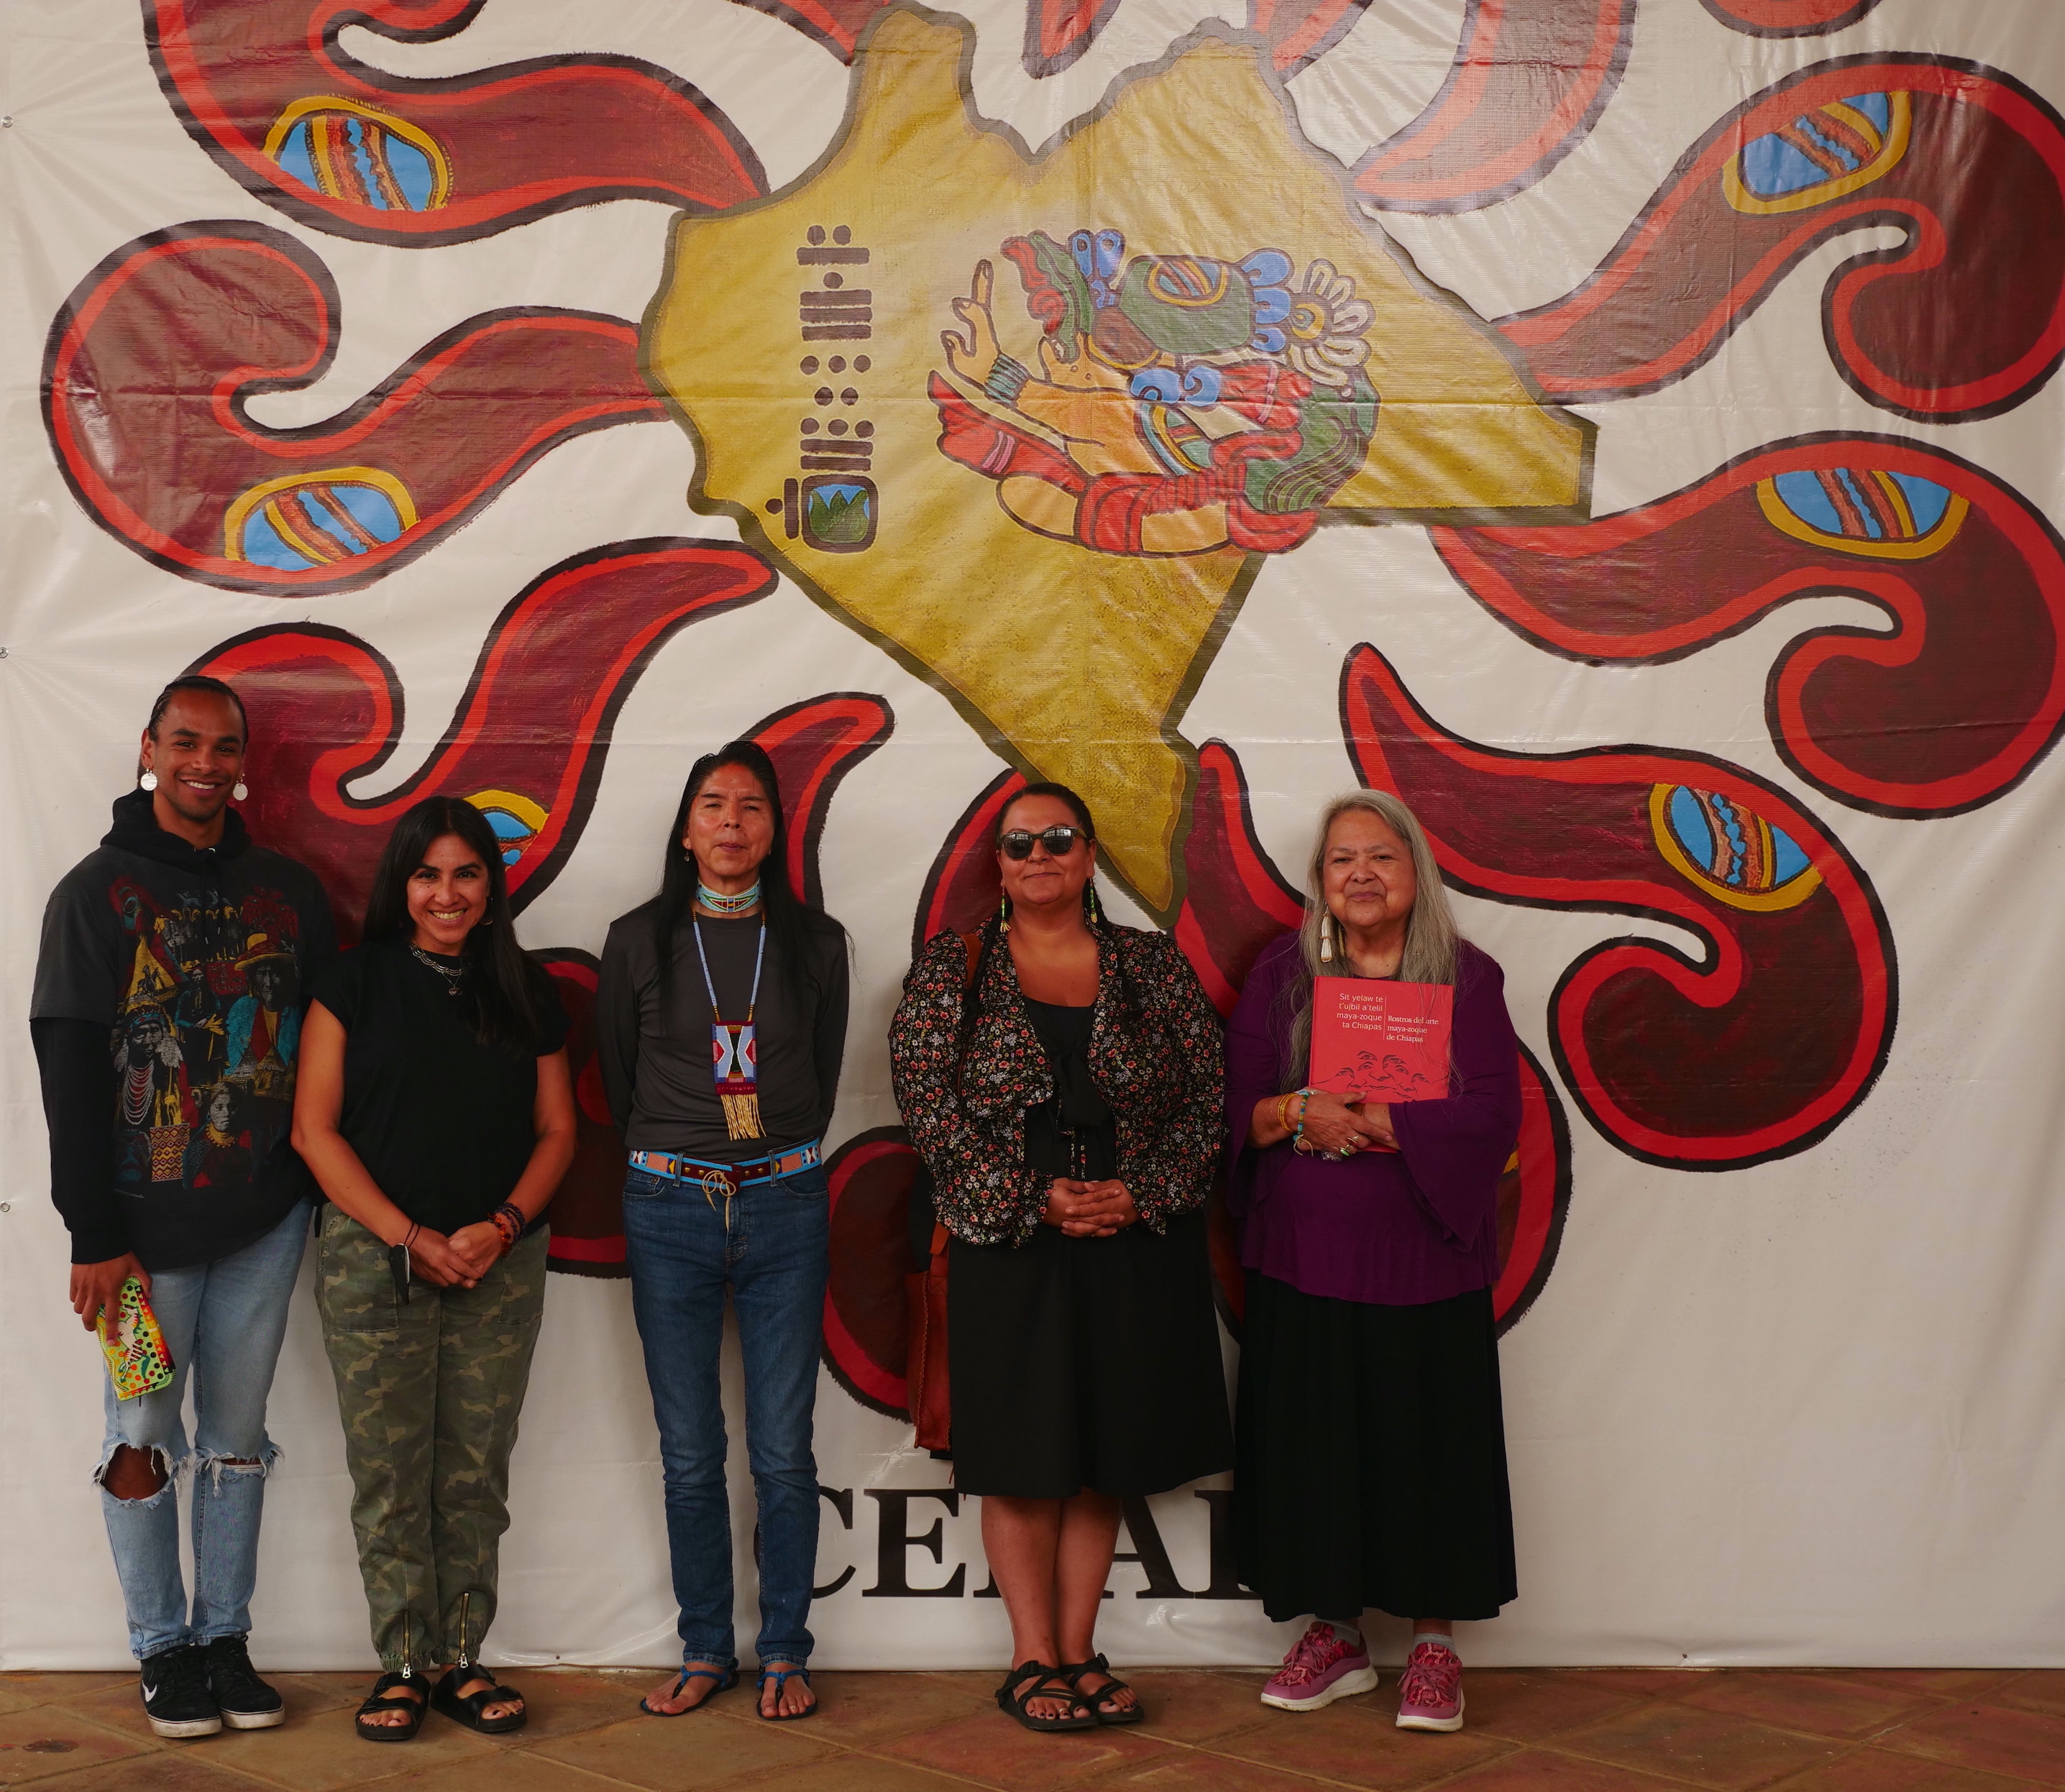 Five individuals standing side by side and smiling in front of a colorful mural